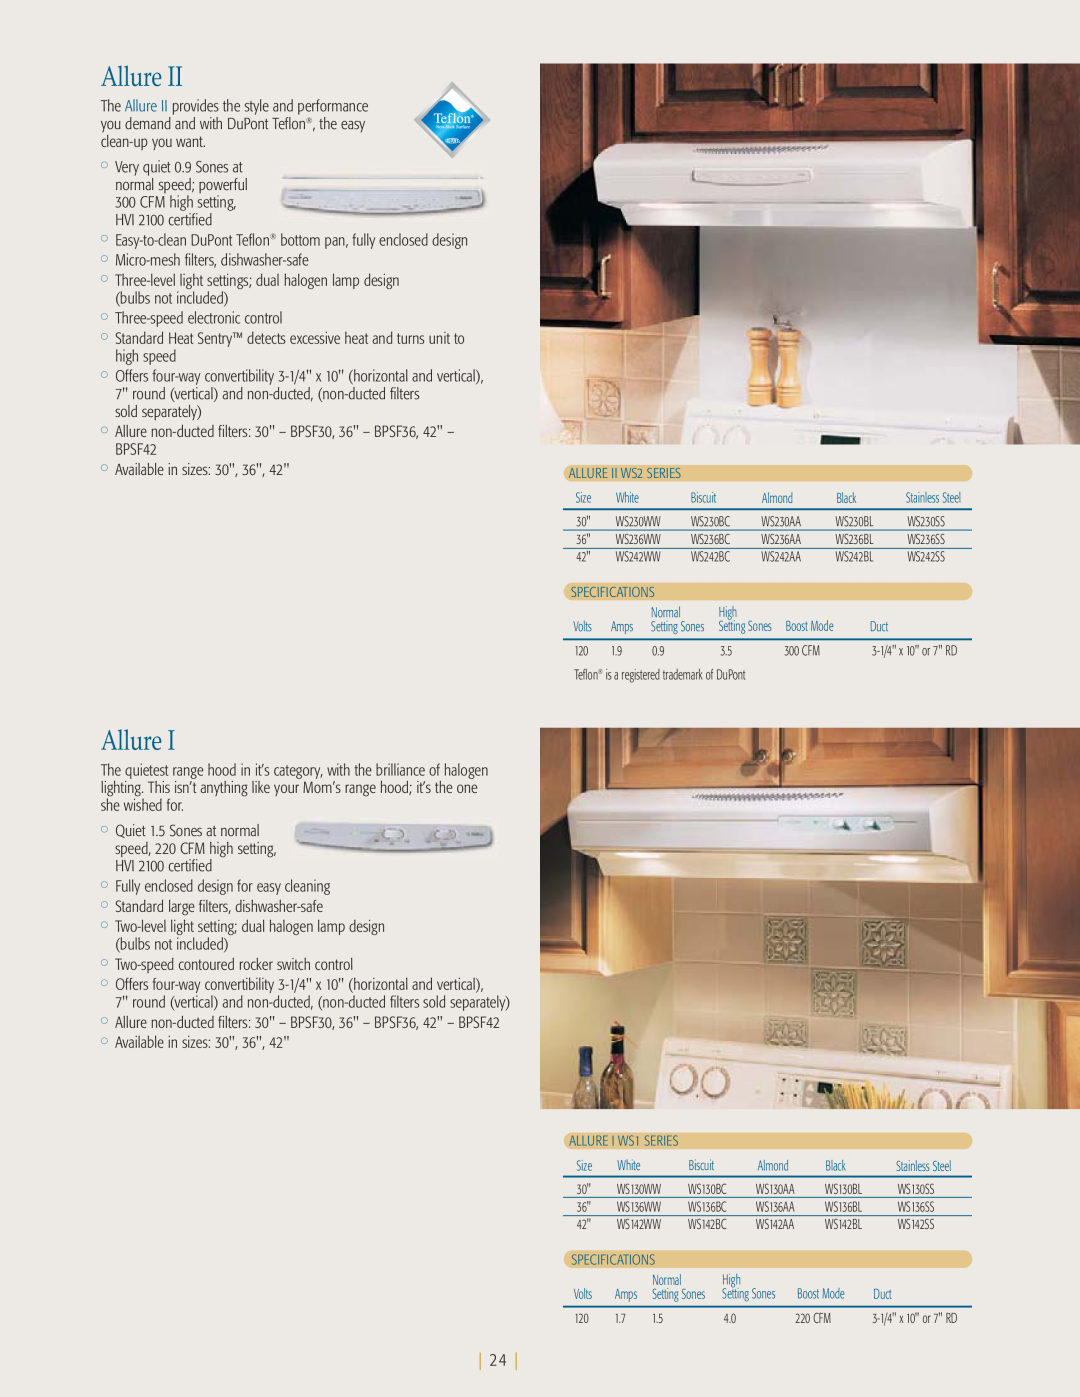 NuTone kitchen ventilation Allure, round vertical and non-ducted, non-ducted filters sold separately, WS230SS, WS236SS 